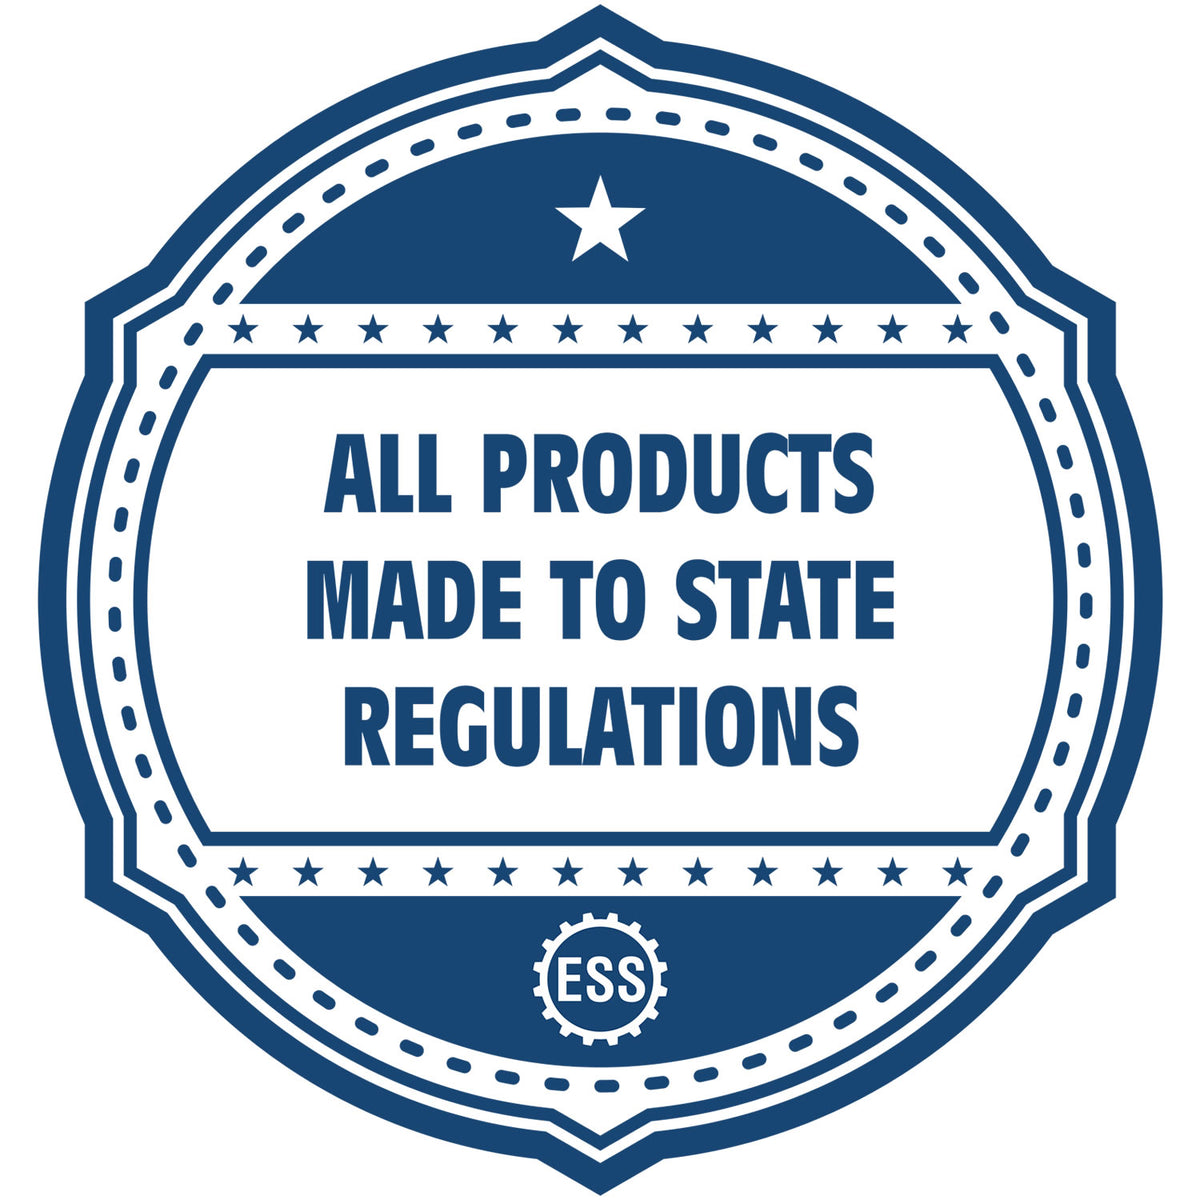 A blue icon or badge for the Gift Pennsylvania Architect Seal showing that this product is made in compliance with state regulations.